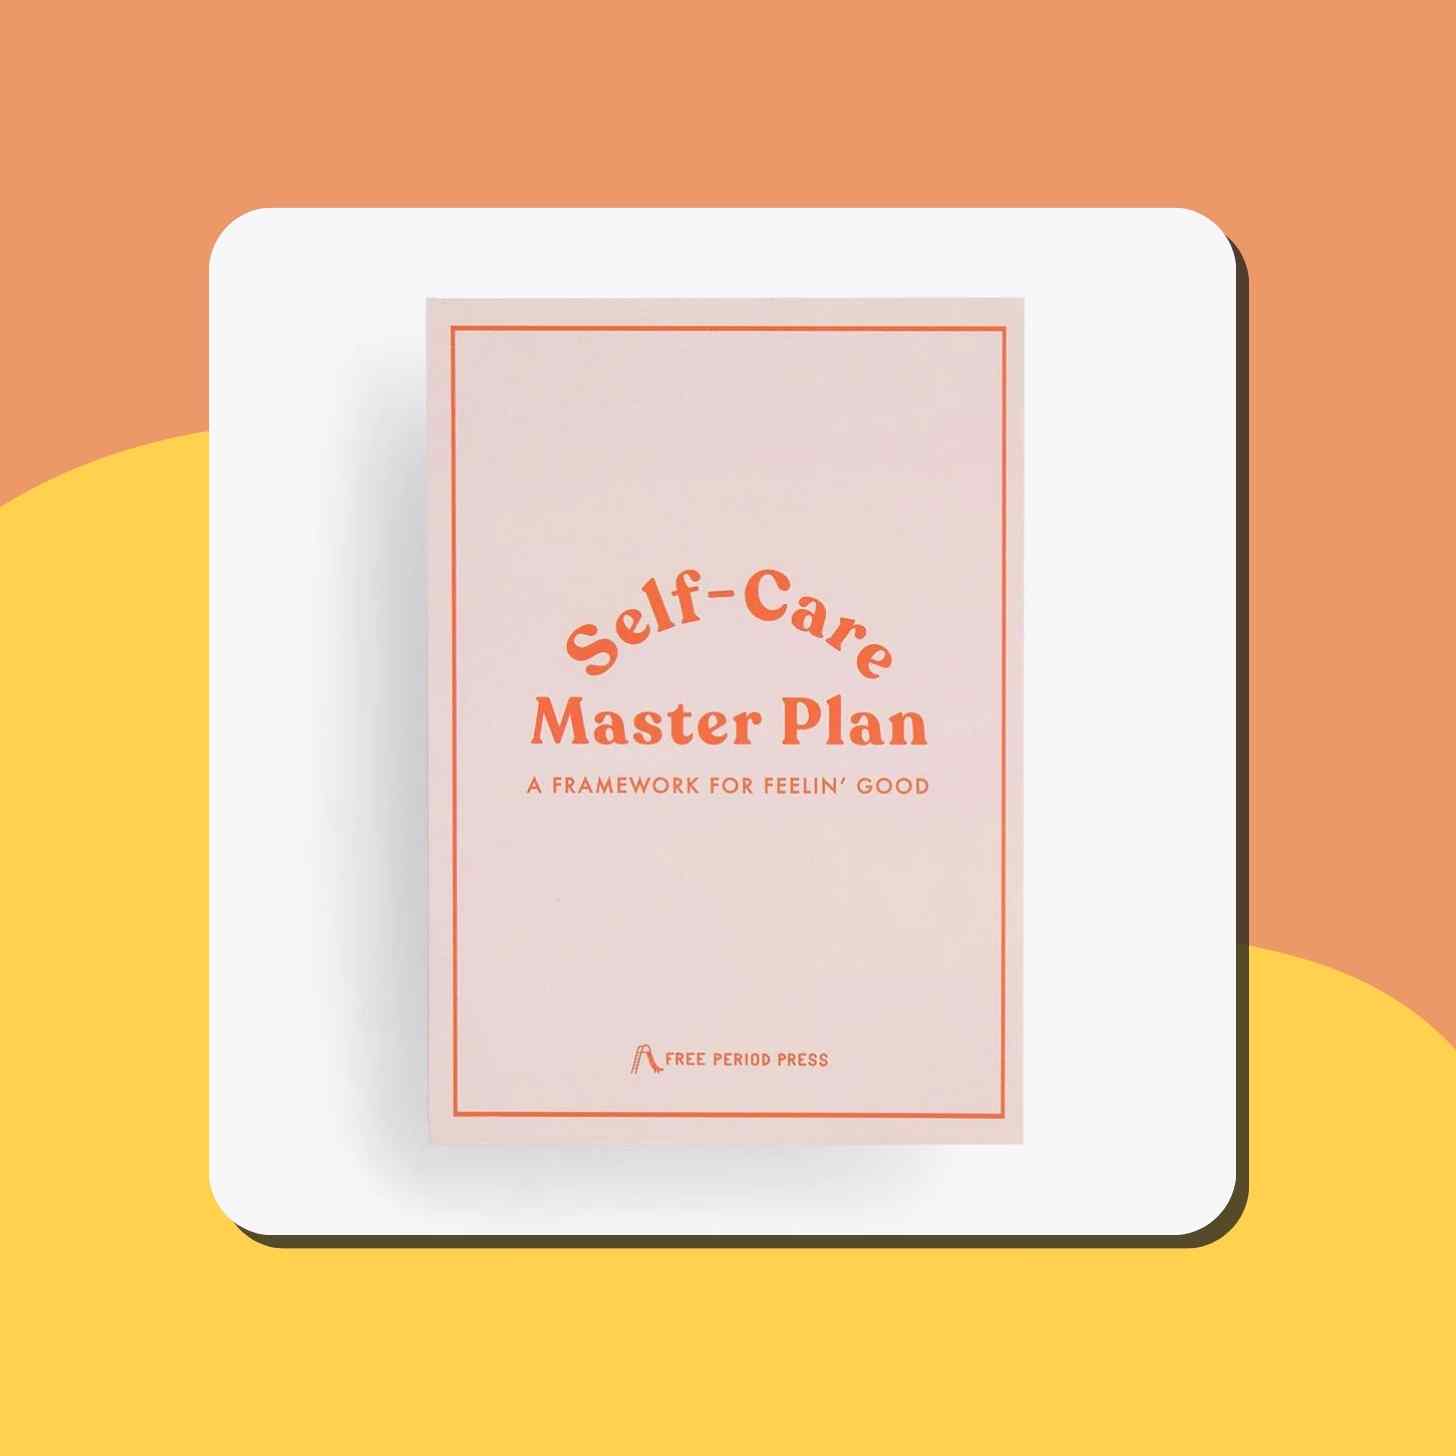 The Cover Of "Self-Care Master Plan" Book. A Framework For Feeling Good